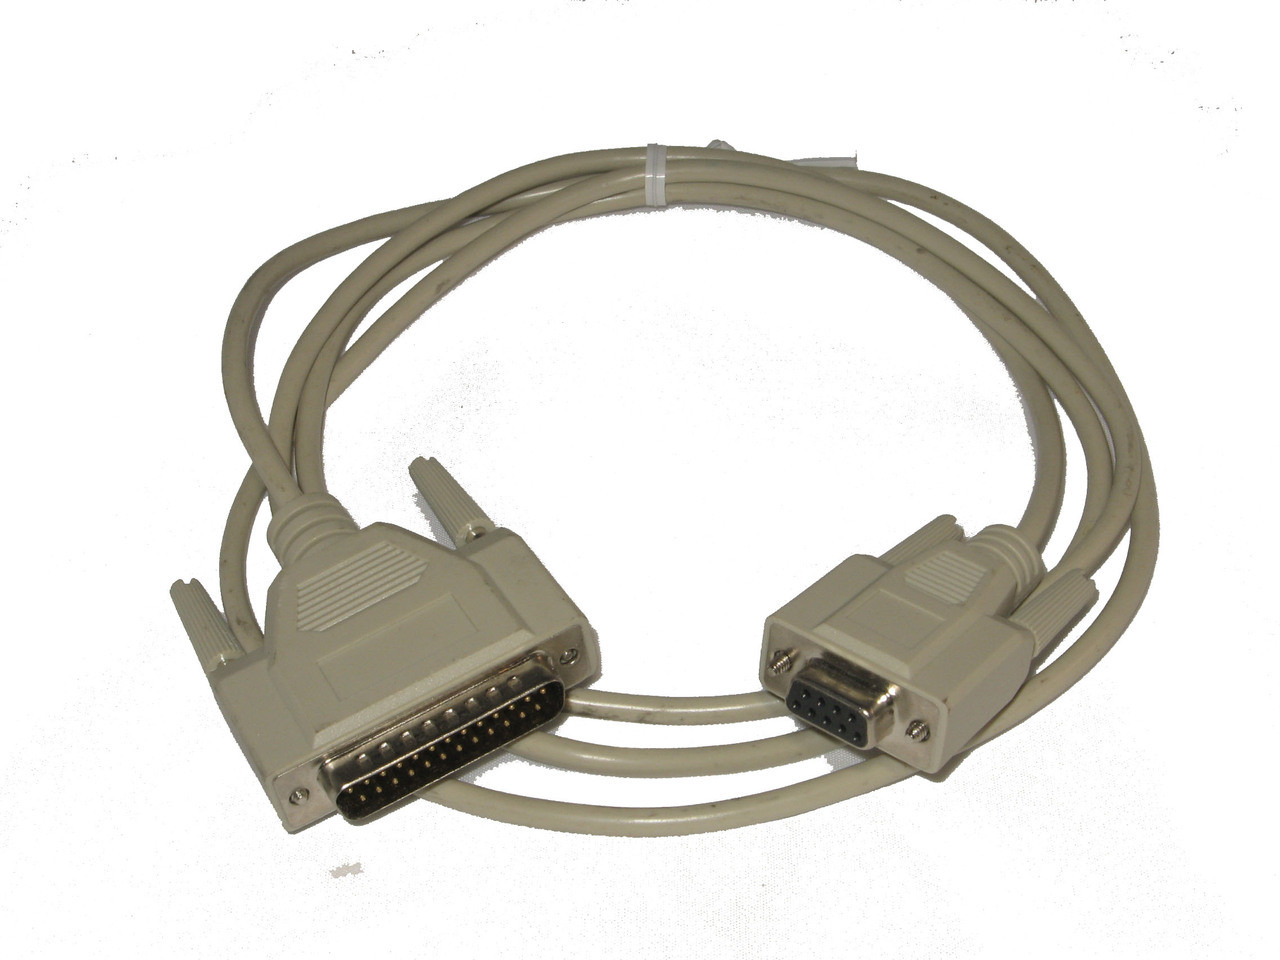 ASDQMS PC Serial Cable to connect 9 Pin to RS232 GageMux®, DB25-M to DB9-F, 6 foot length